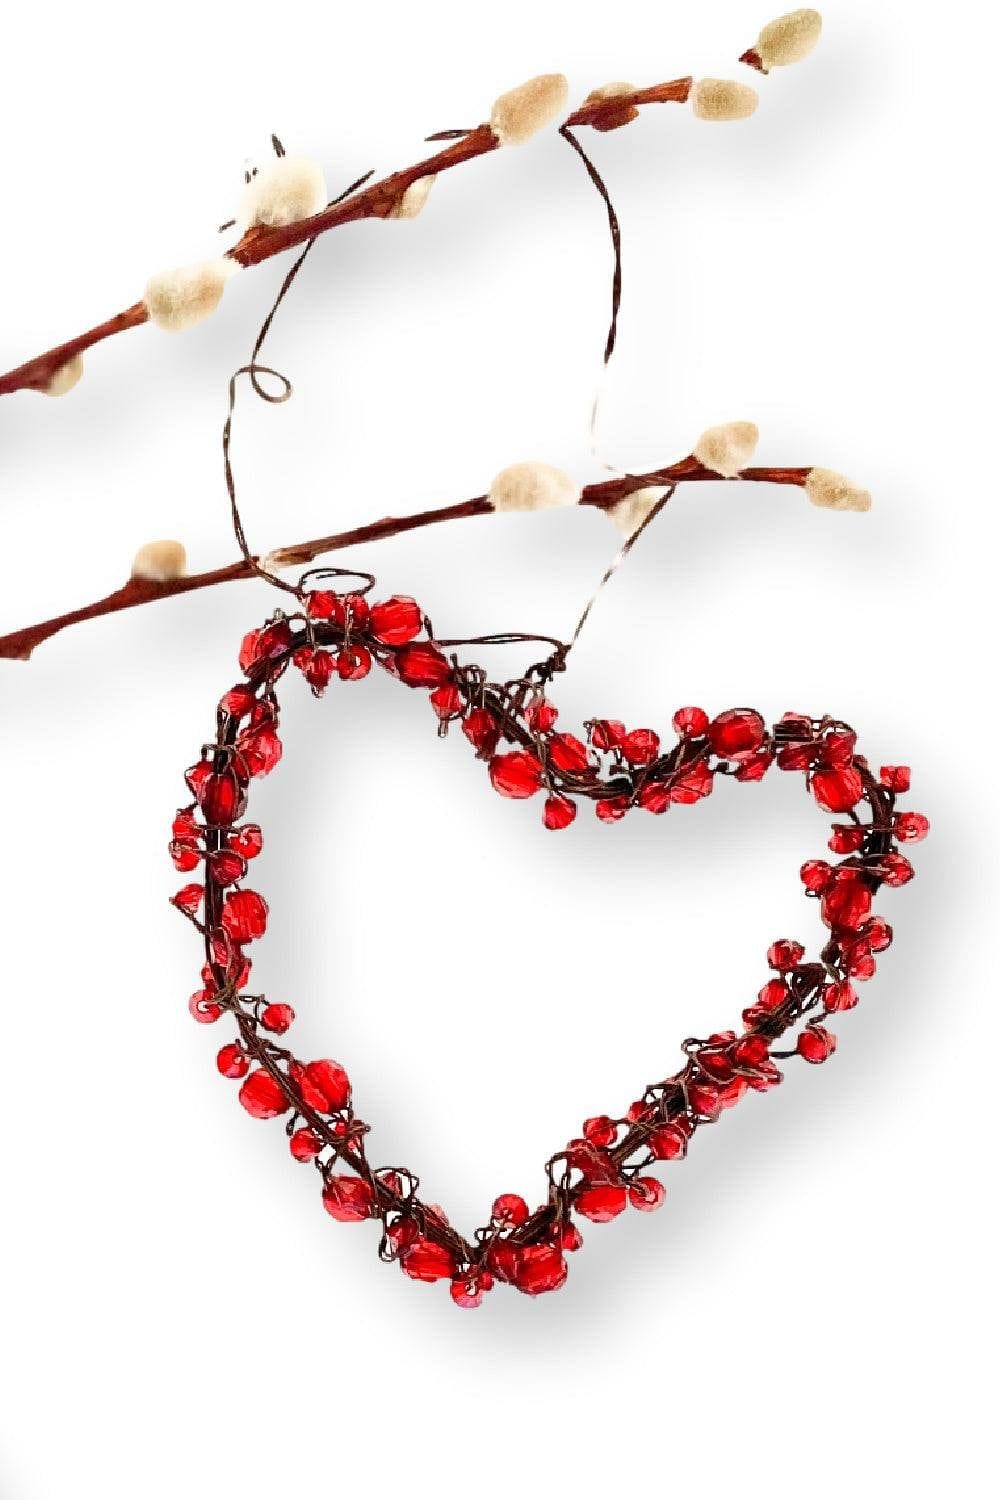 Red Jeweled Wired Heart Ornaments